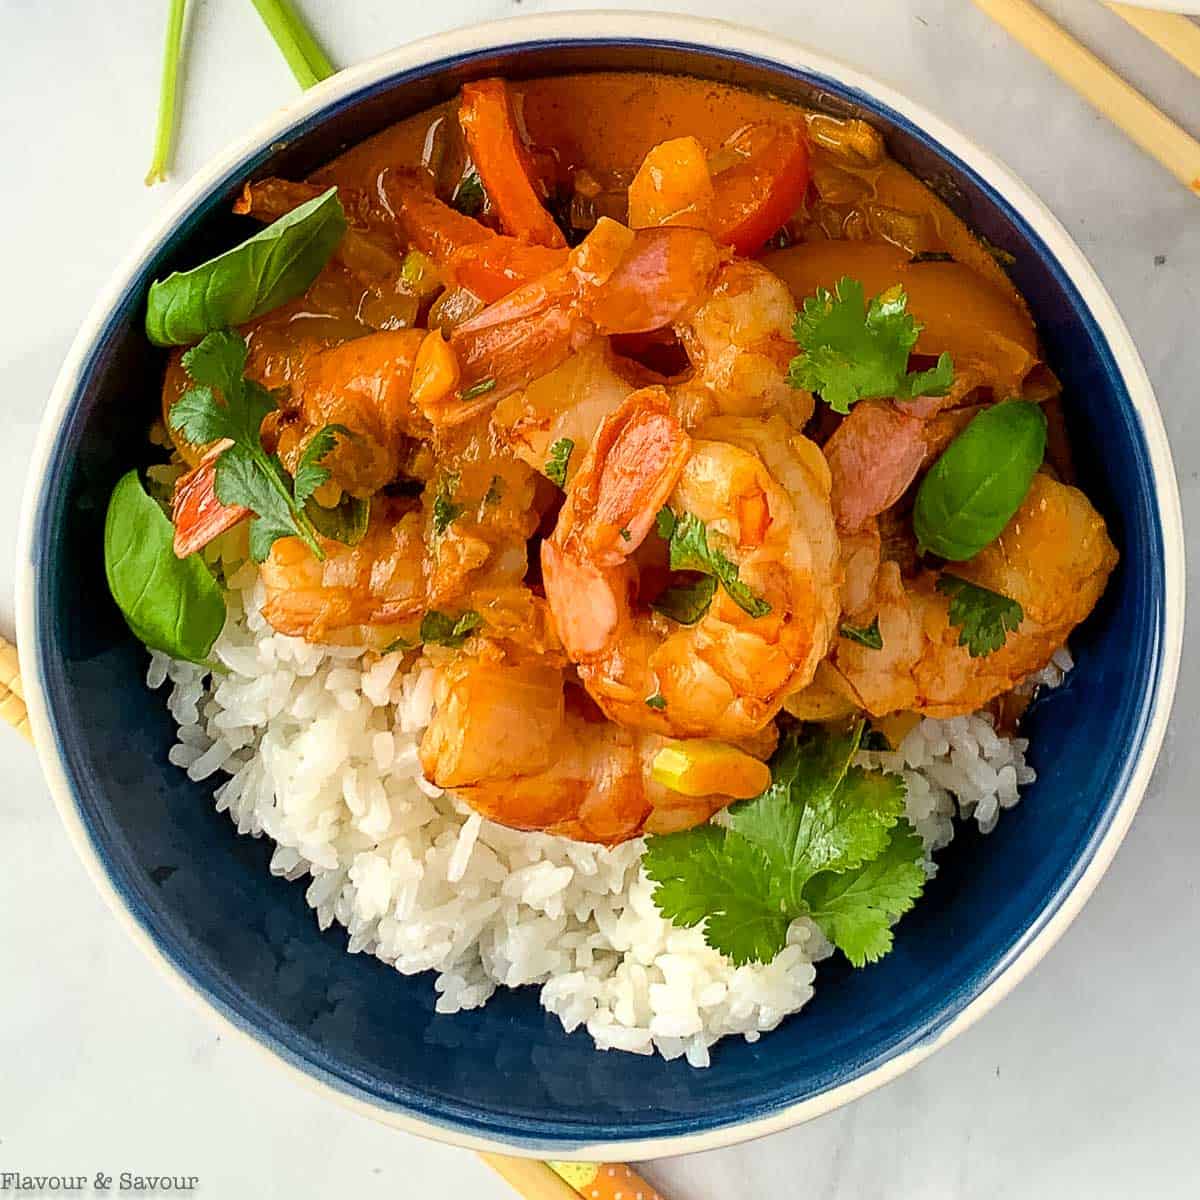 Authentic Thai Recipe for Shrimp in Coconut and Red Curry Sauce